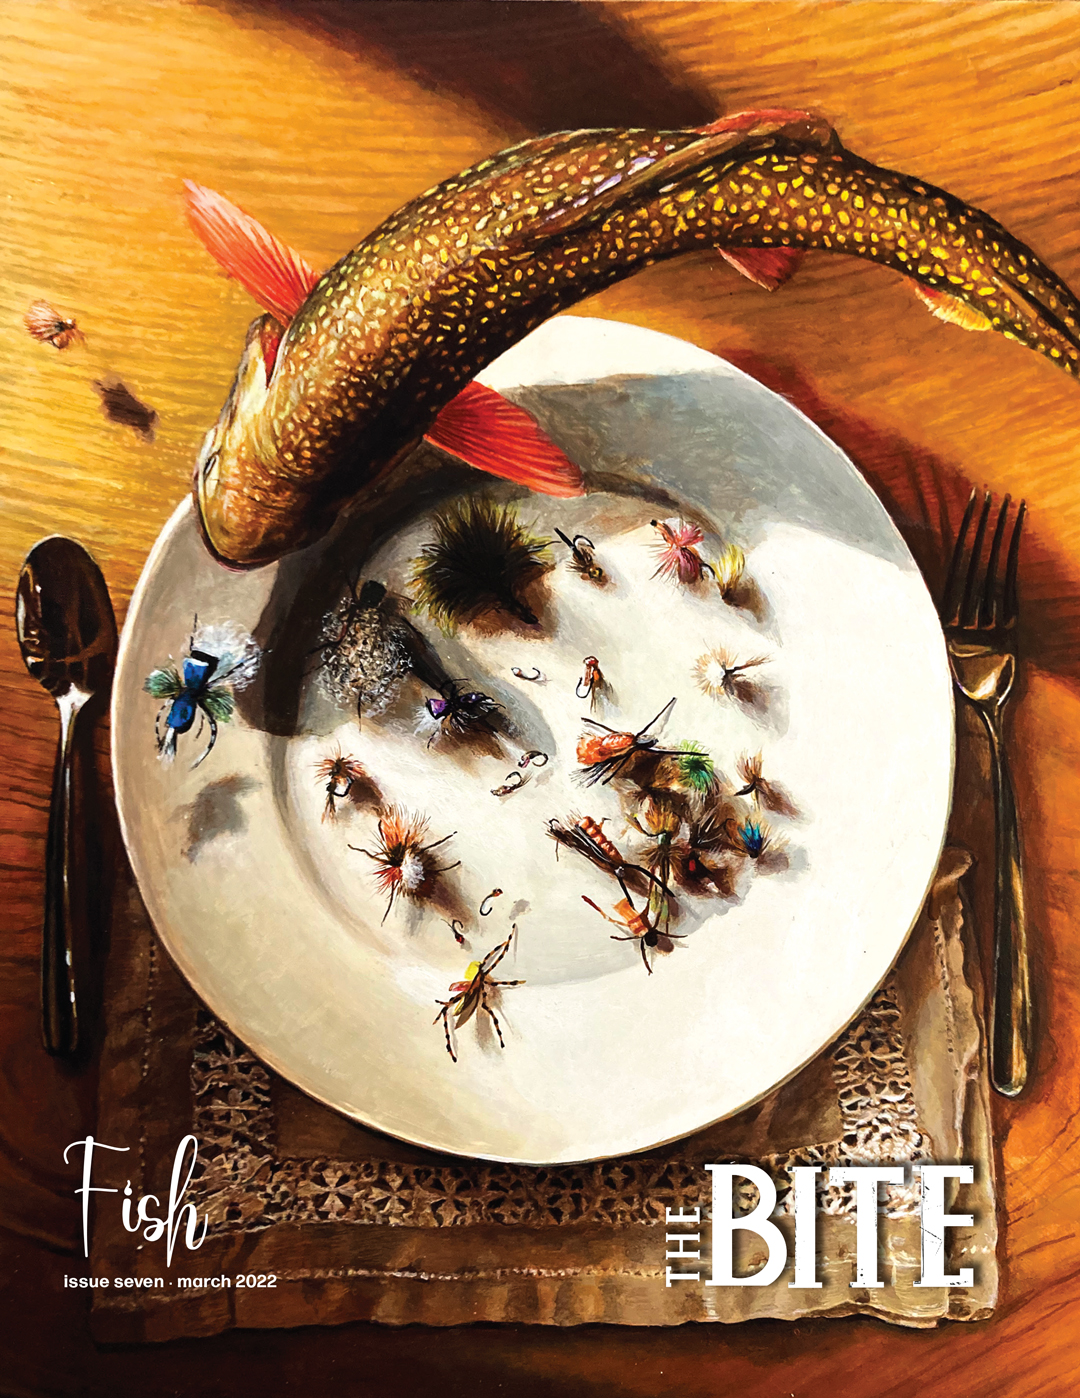 The Bite: Diners